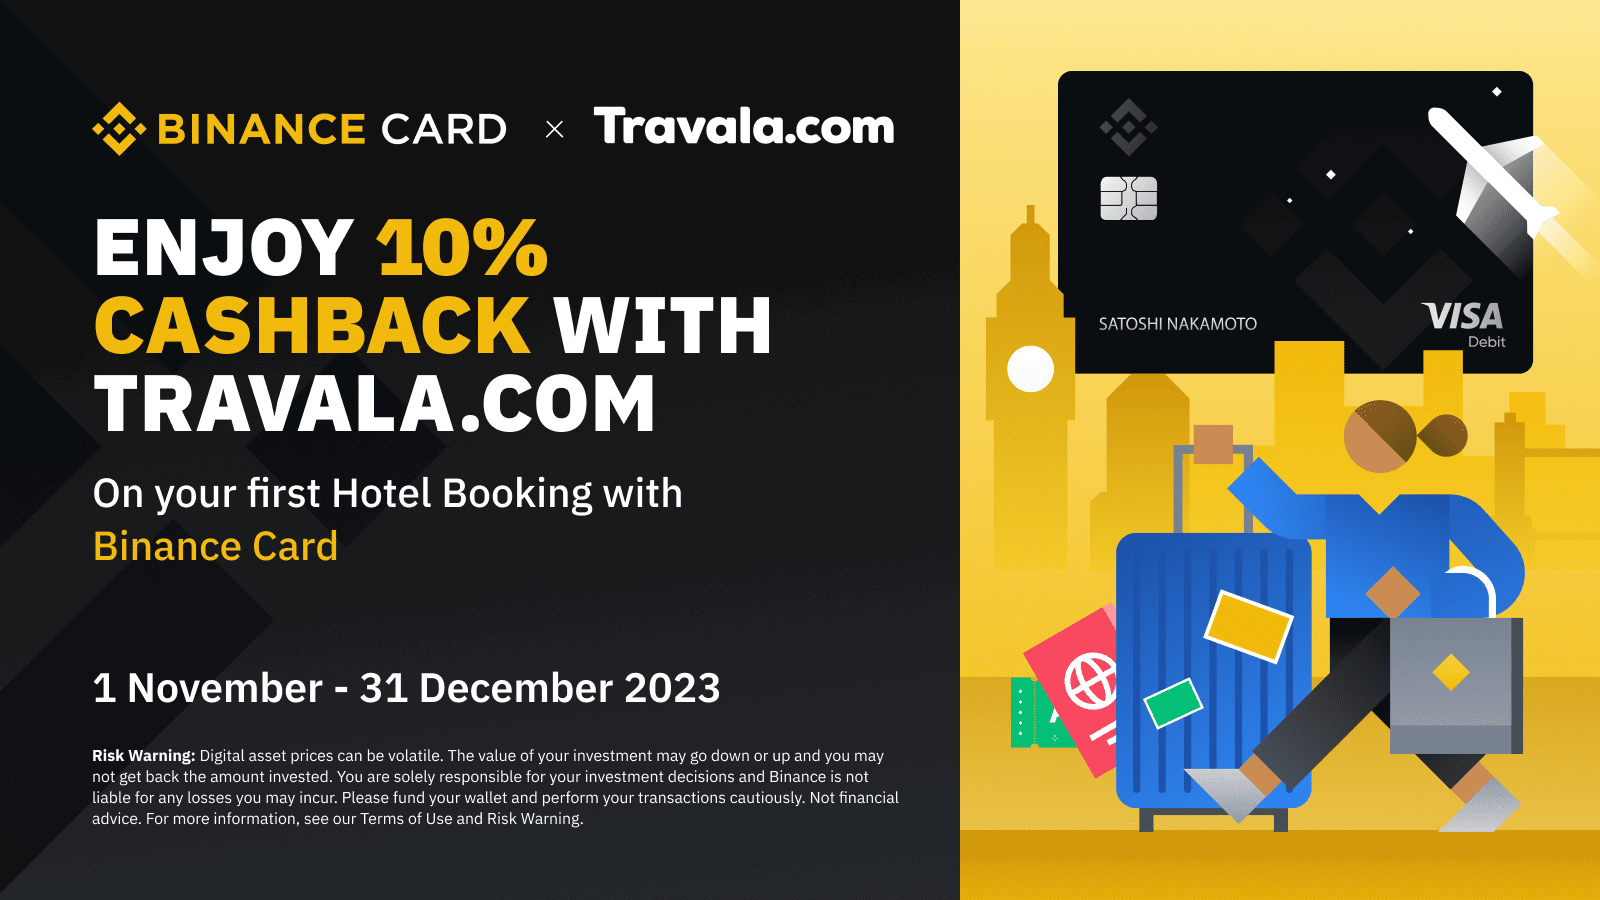 Get 10% Cashback on your first Travala.com hotel booking with Binance Card